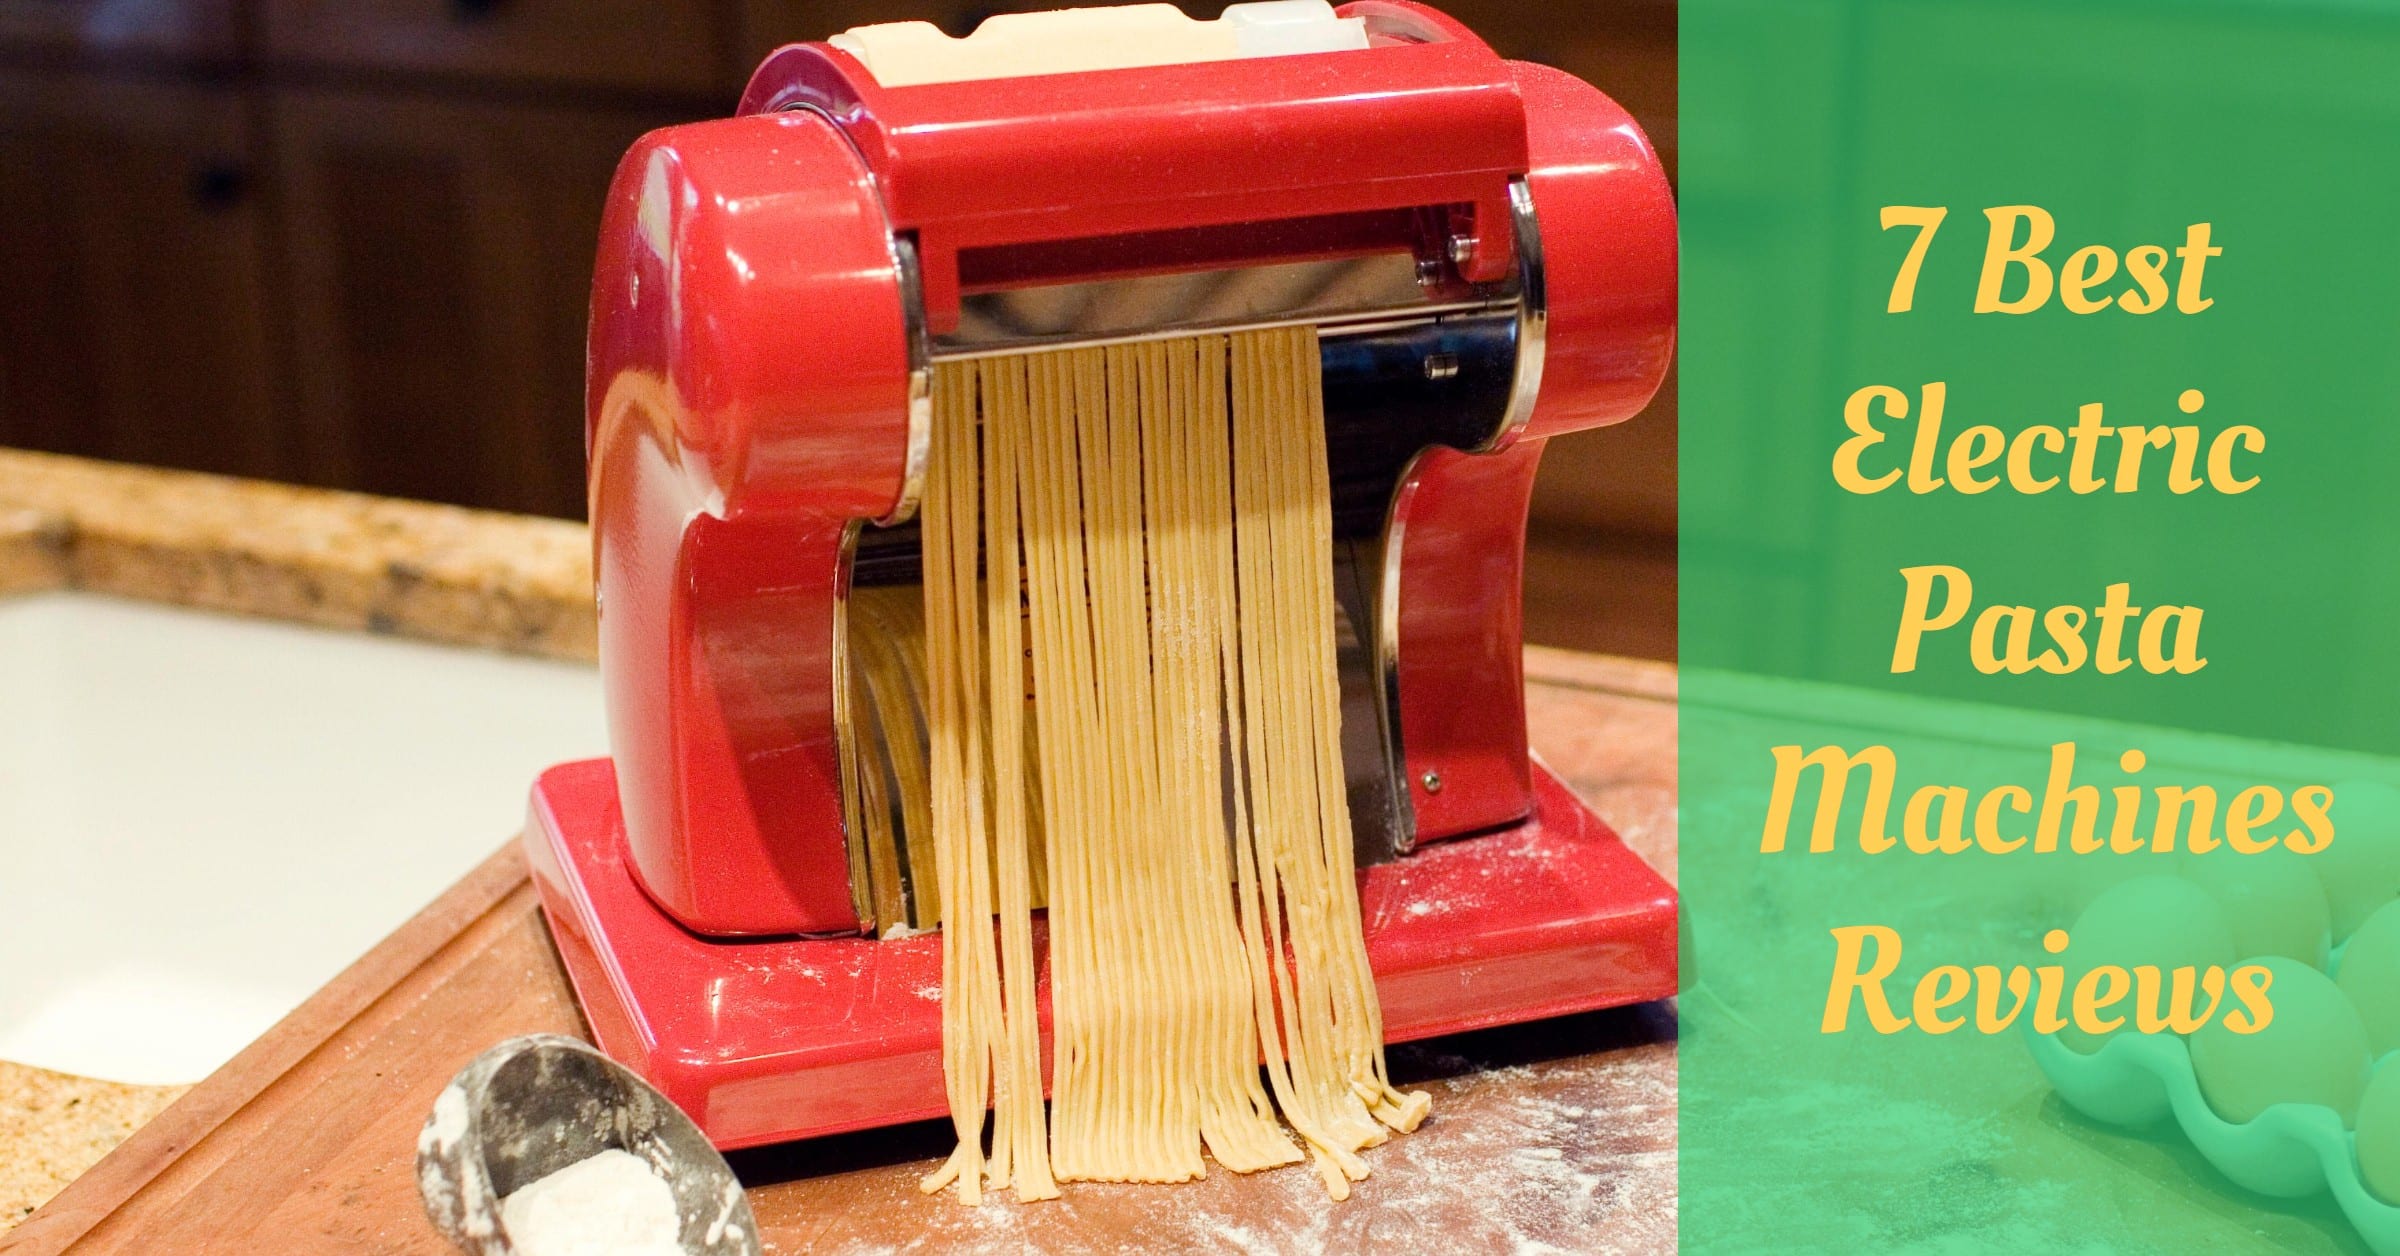 7 Best Electric Pasta Machines Reviews - Cooking Top Gear